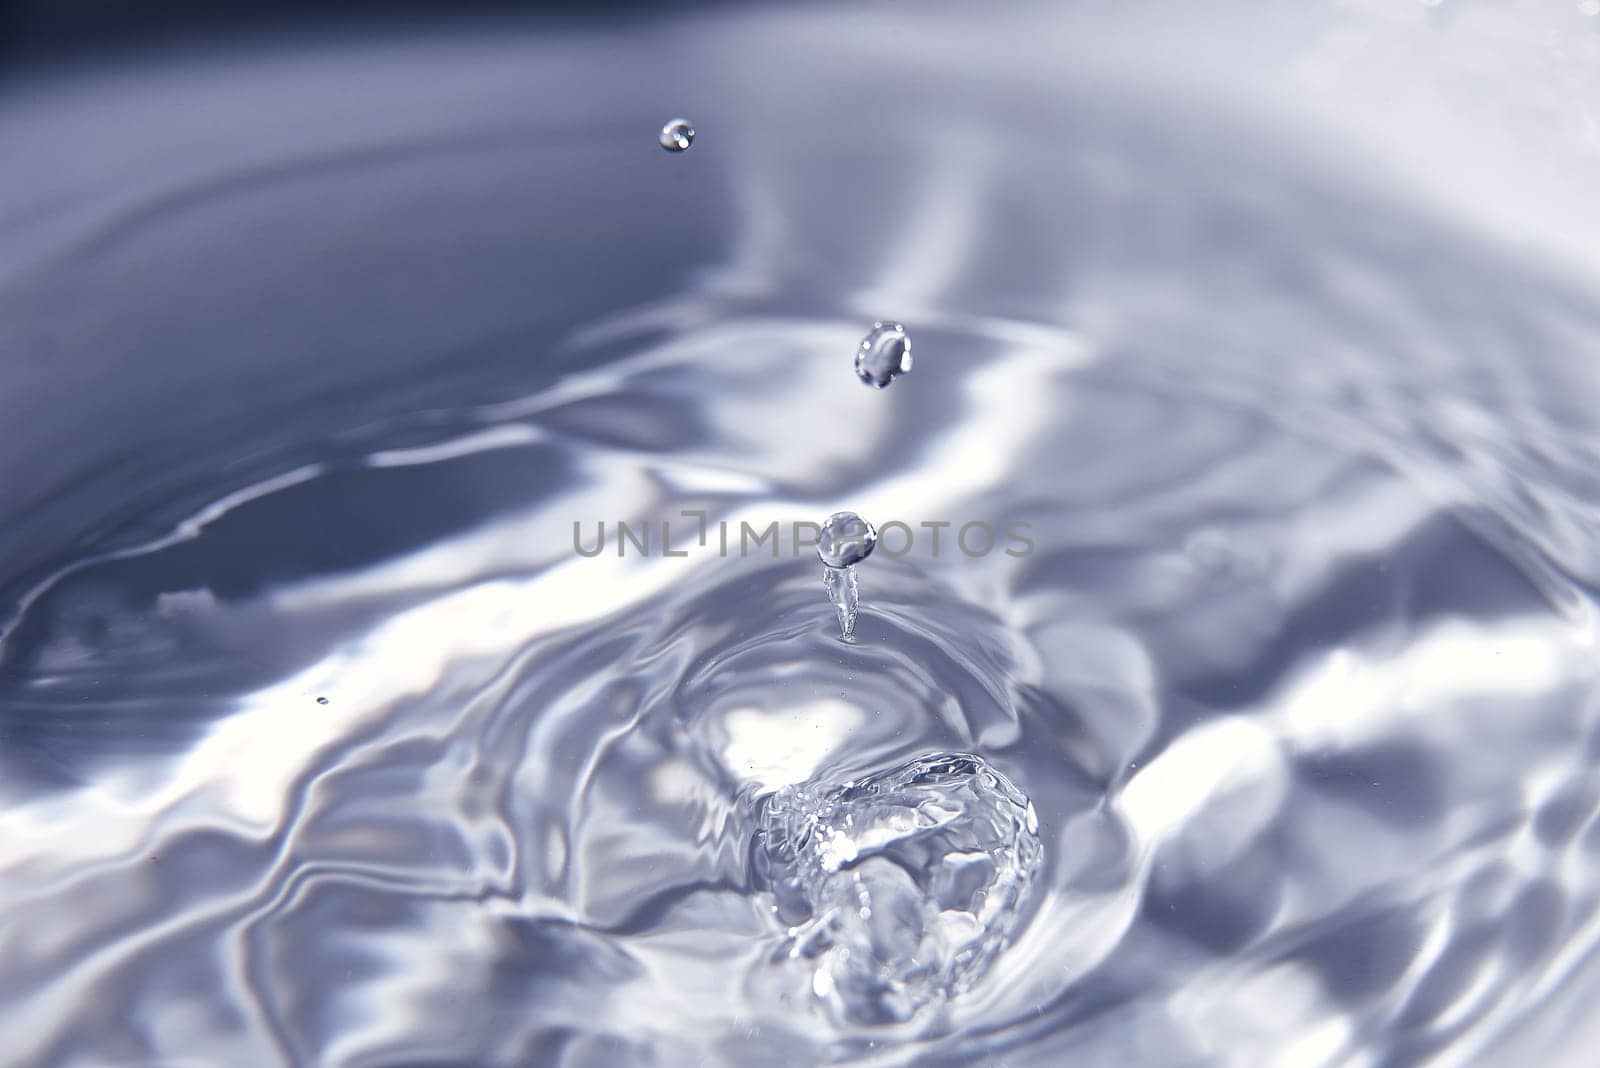 046.One or more drops of water splashing into waves and undefined shapes. Wallpaper by raul_ruiz